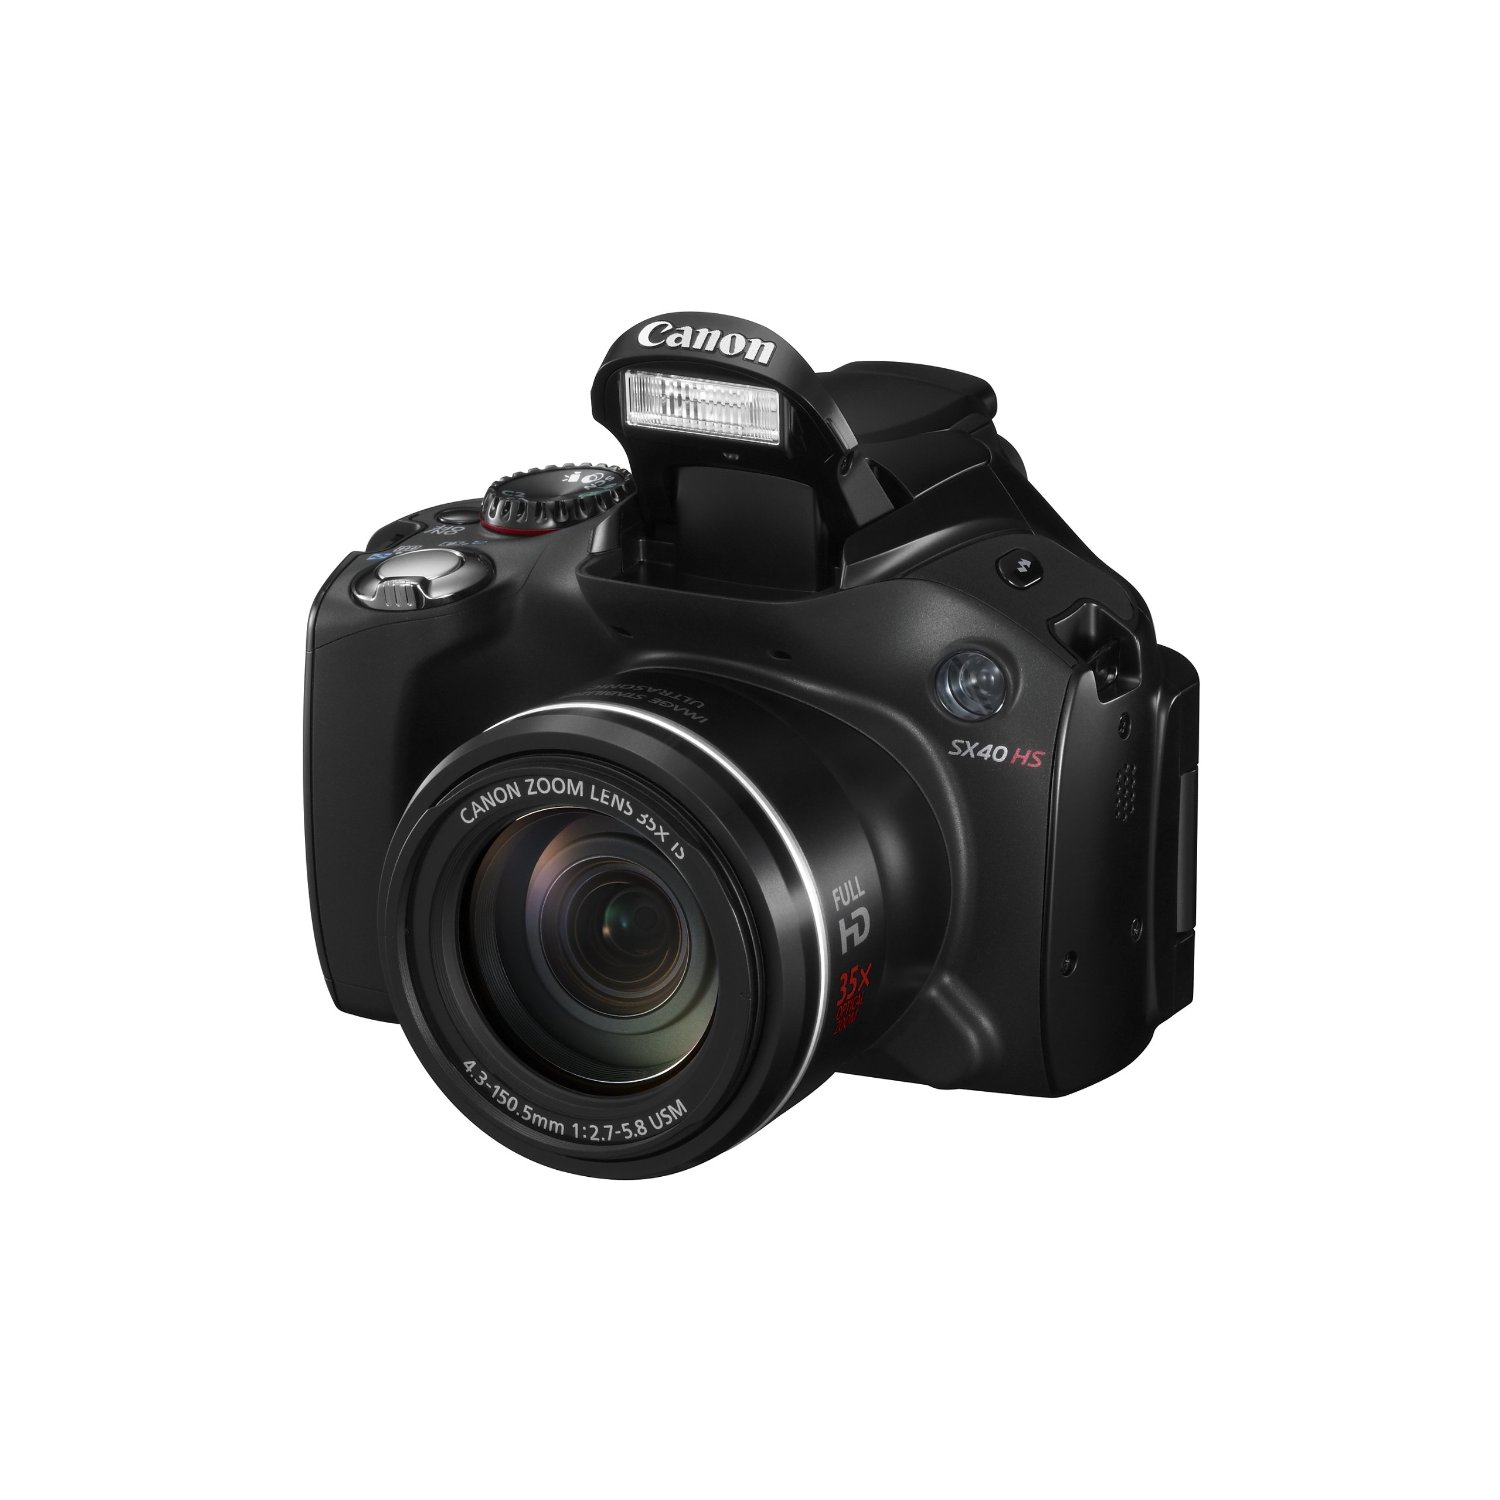 http://thetechjournal.com/wp-content/uploads/images/1110/1319693952-canons-new-sx40-hs-121mp-digital-camera-7.jpg